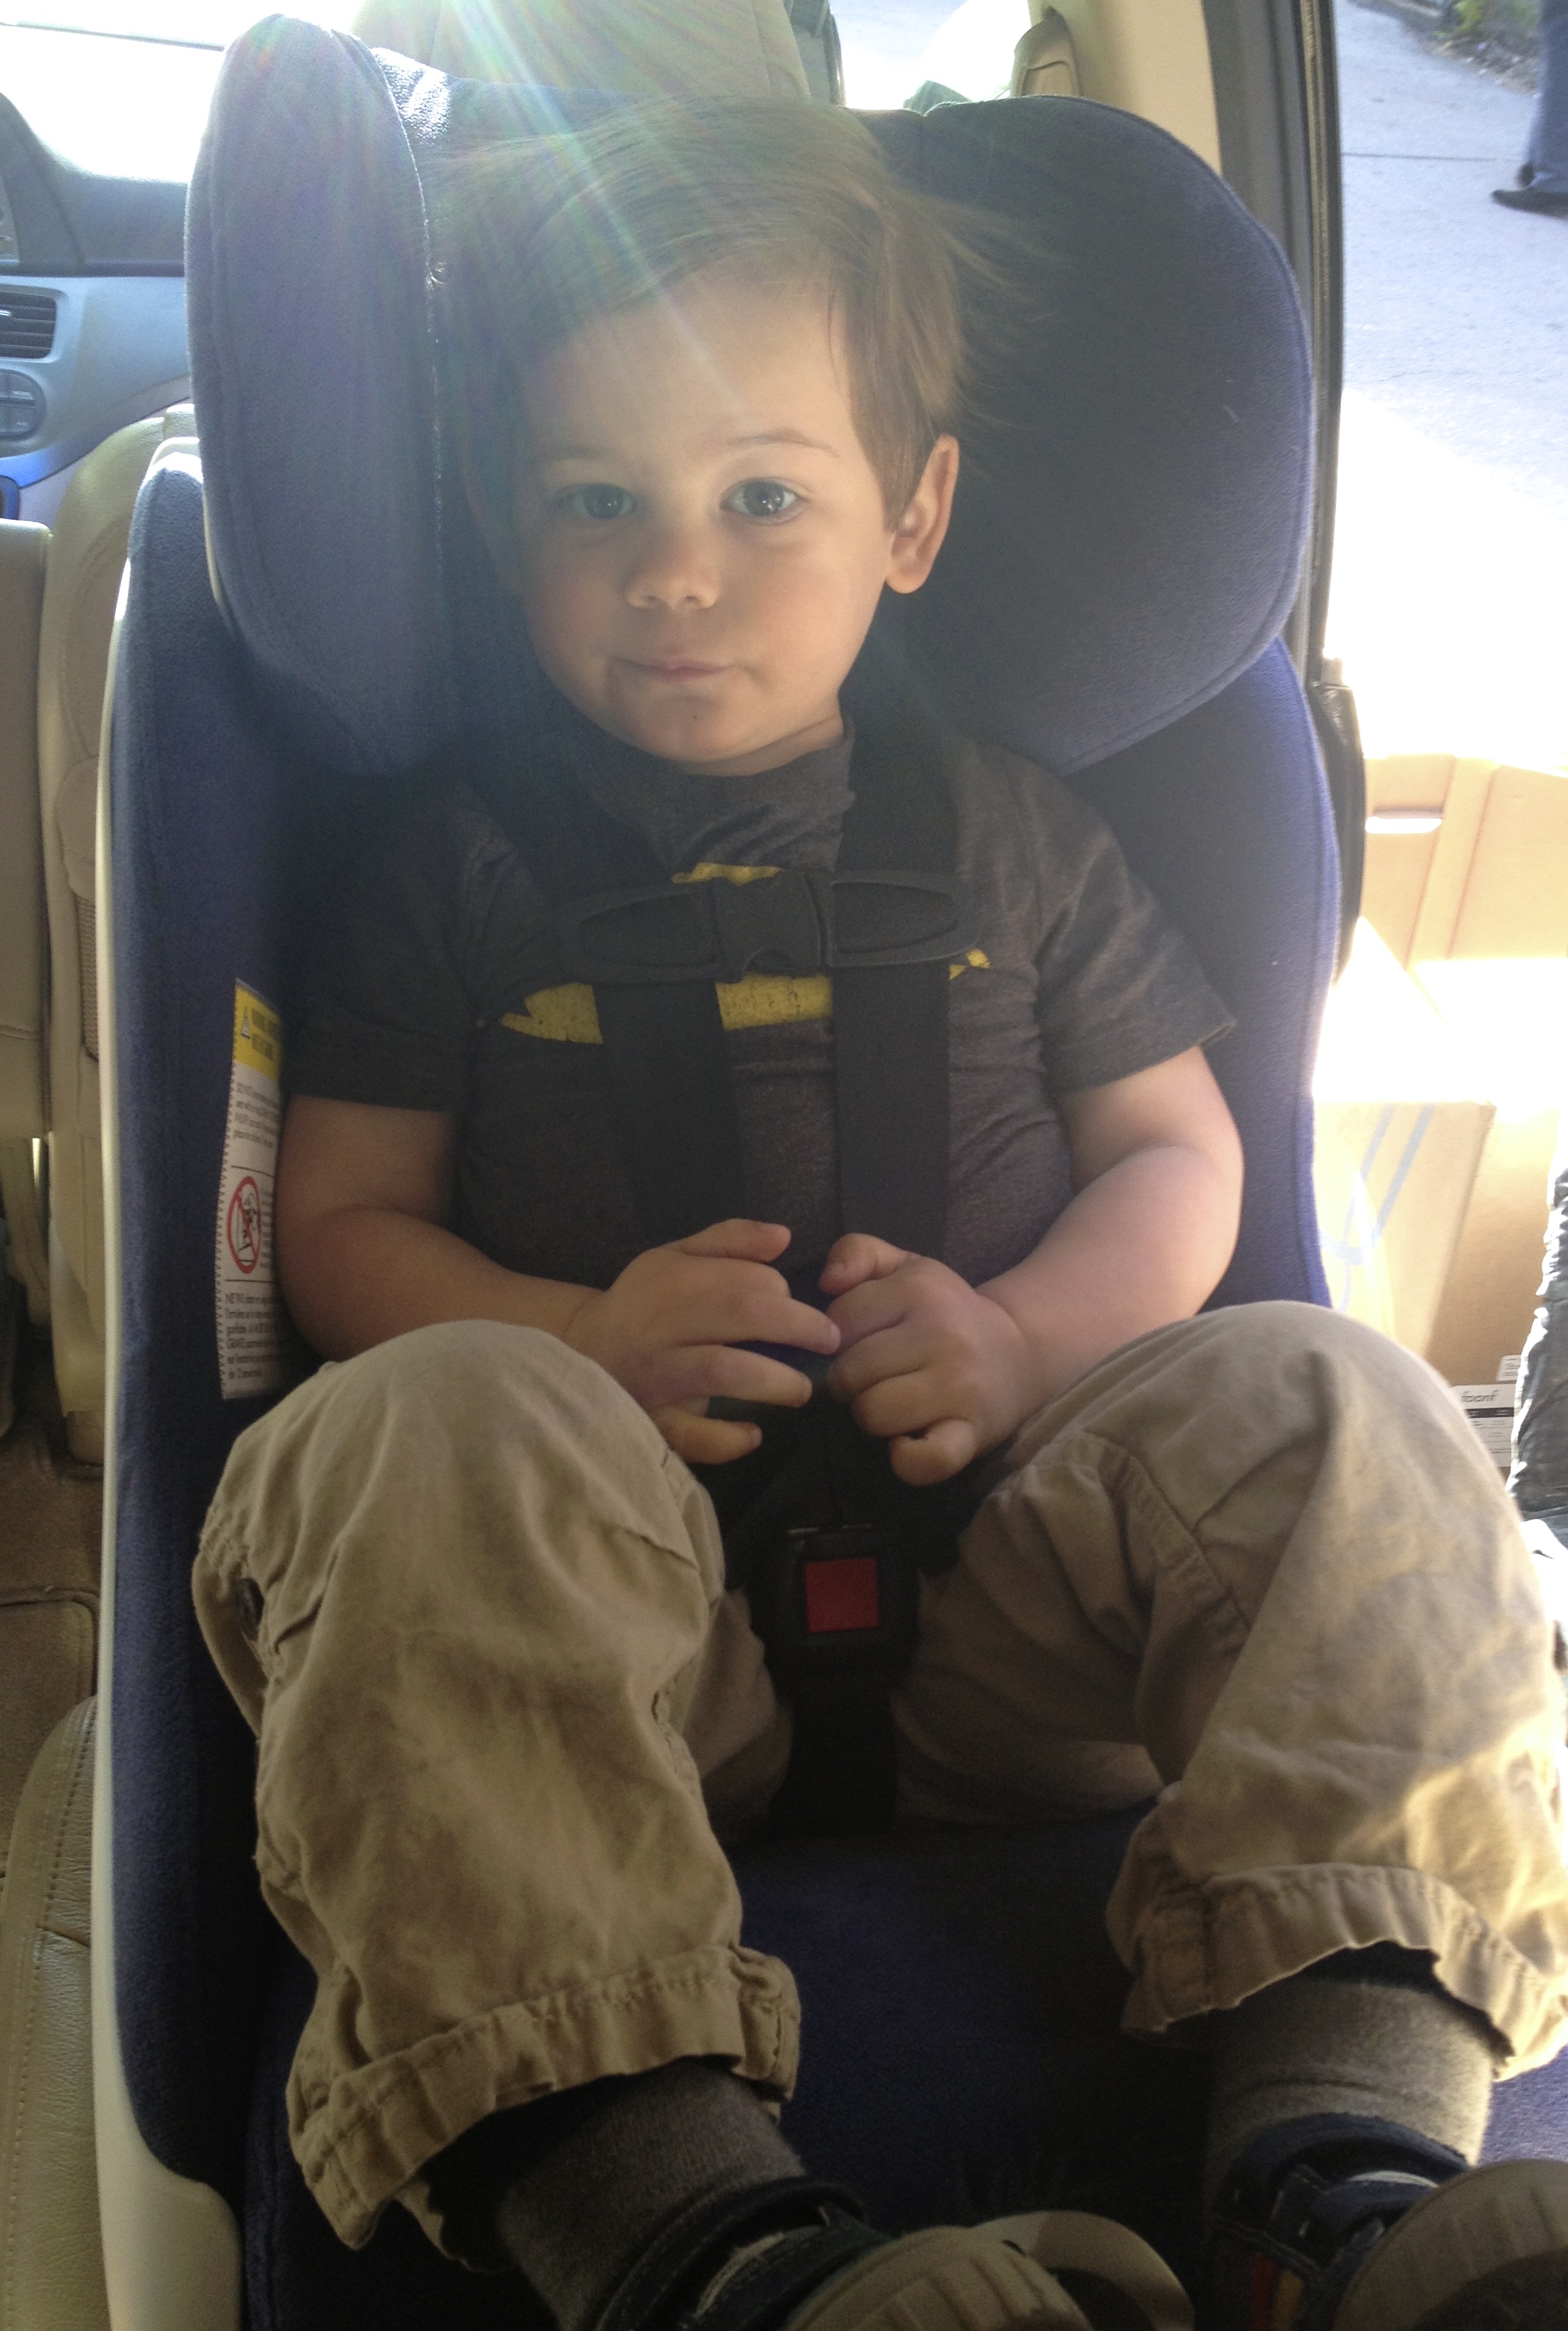 Can My 1-Year-Old Sit in a Forward Facing Car Seat?